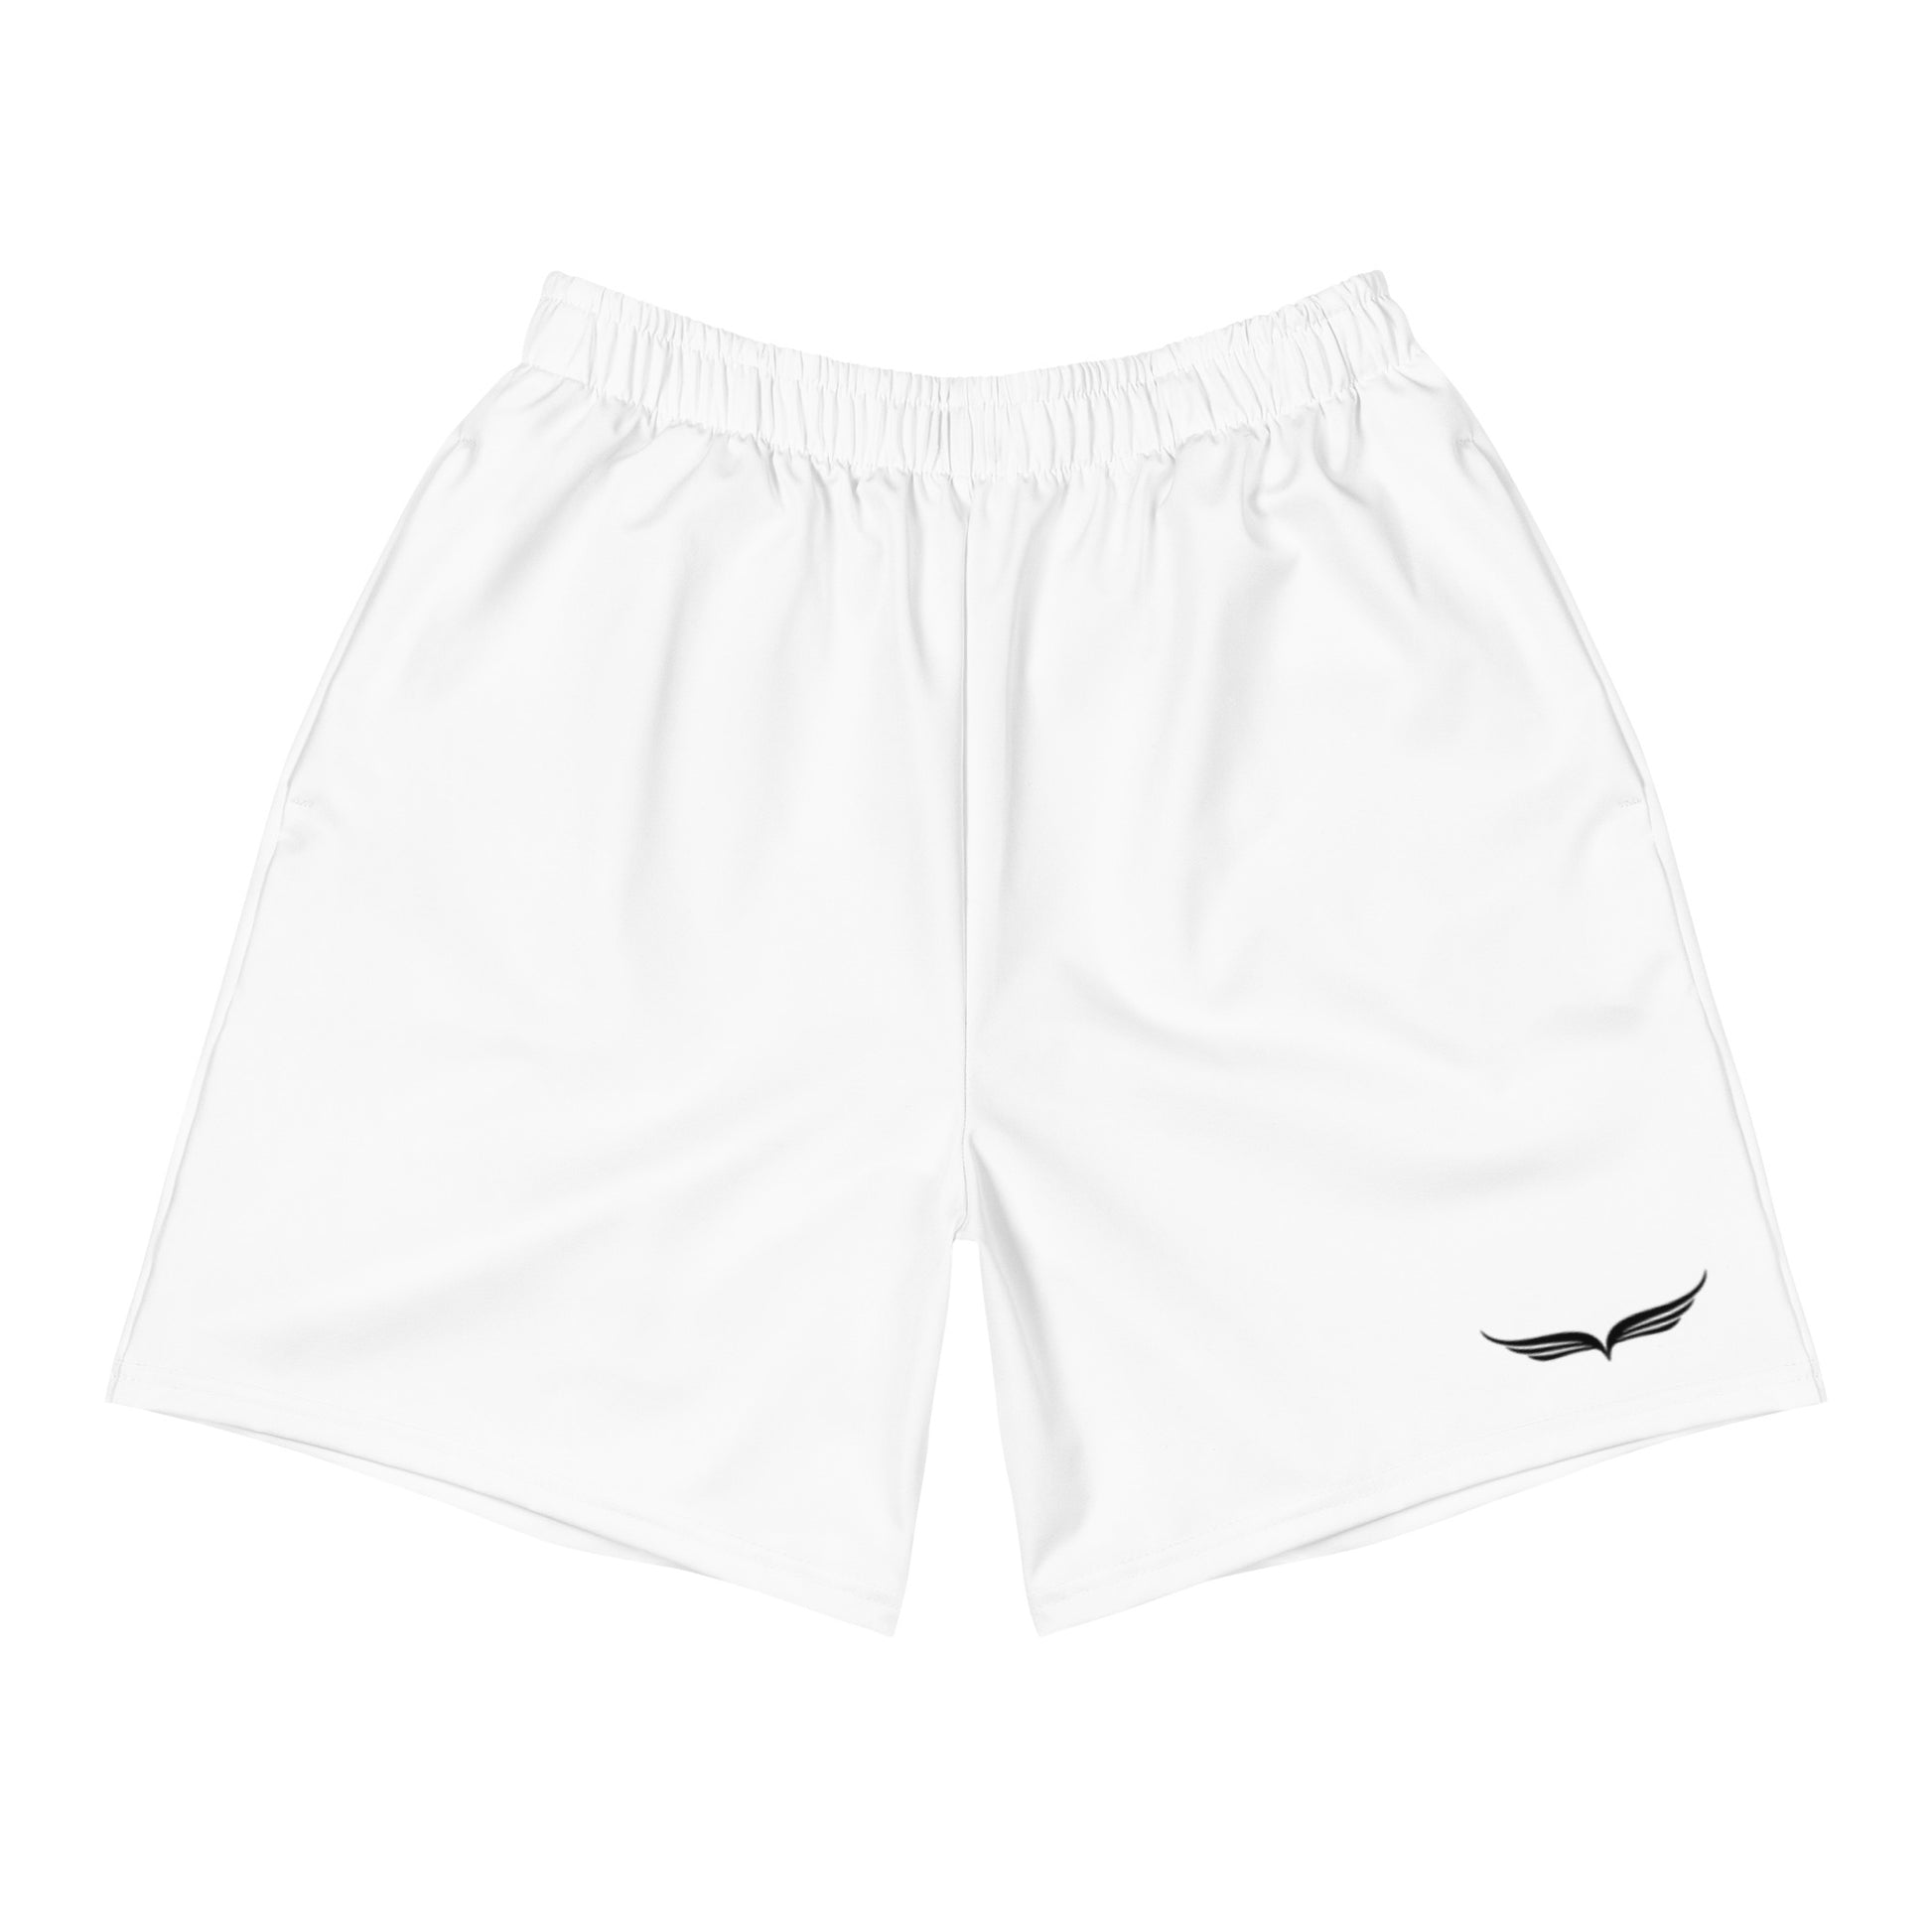 https://seekmore.shop/cdn/shop/files/all-over-print-mens-recycled-athletic-shorts-white-front-6545a9388f071.jpg?v=1699064134&width=1946